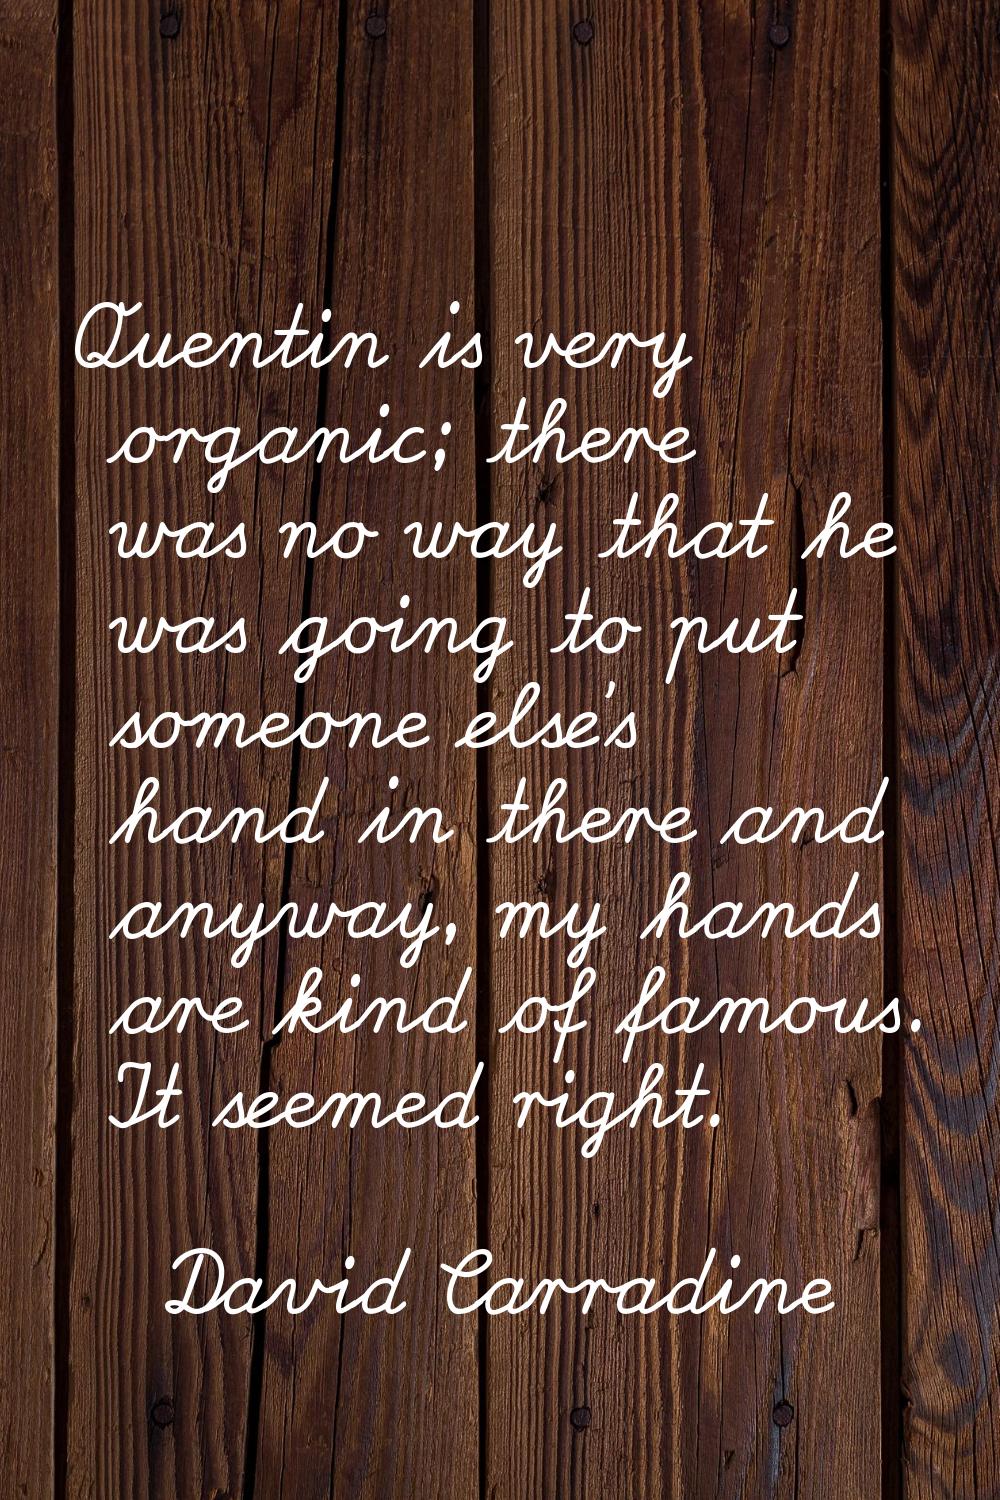 Quentin is very organic; there was no way that he was going to put someone else's hand in there and